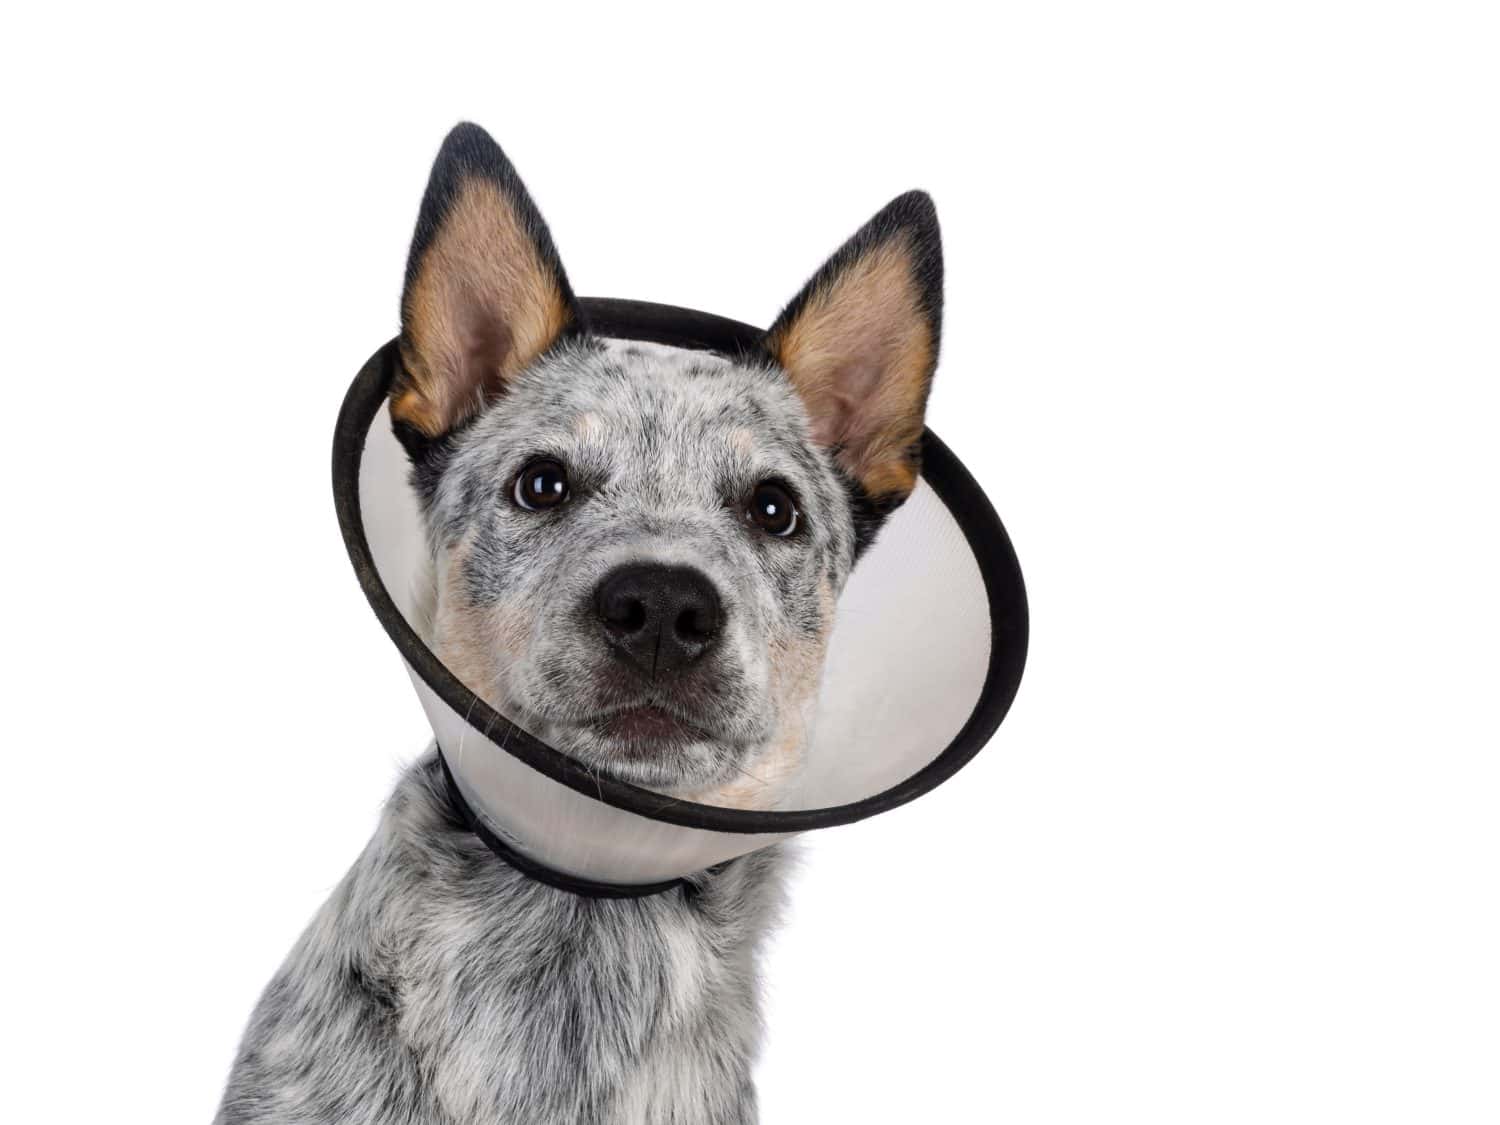 Head shot of cute Cattle dog pup, wearing medical cone around neck. Looking beside camera. Tongue out panting. Isolated on a white background.